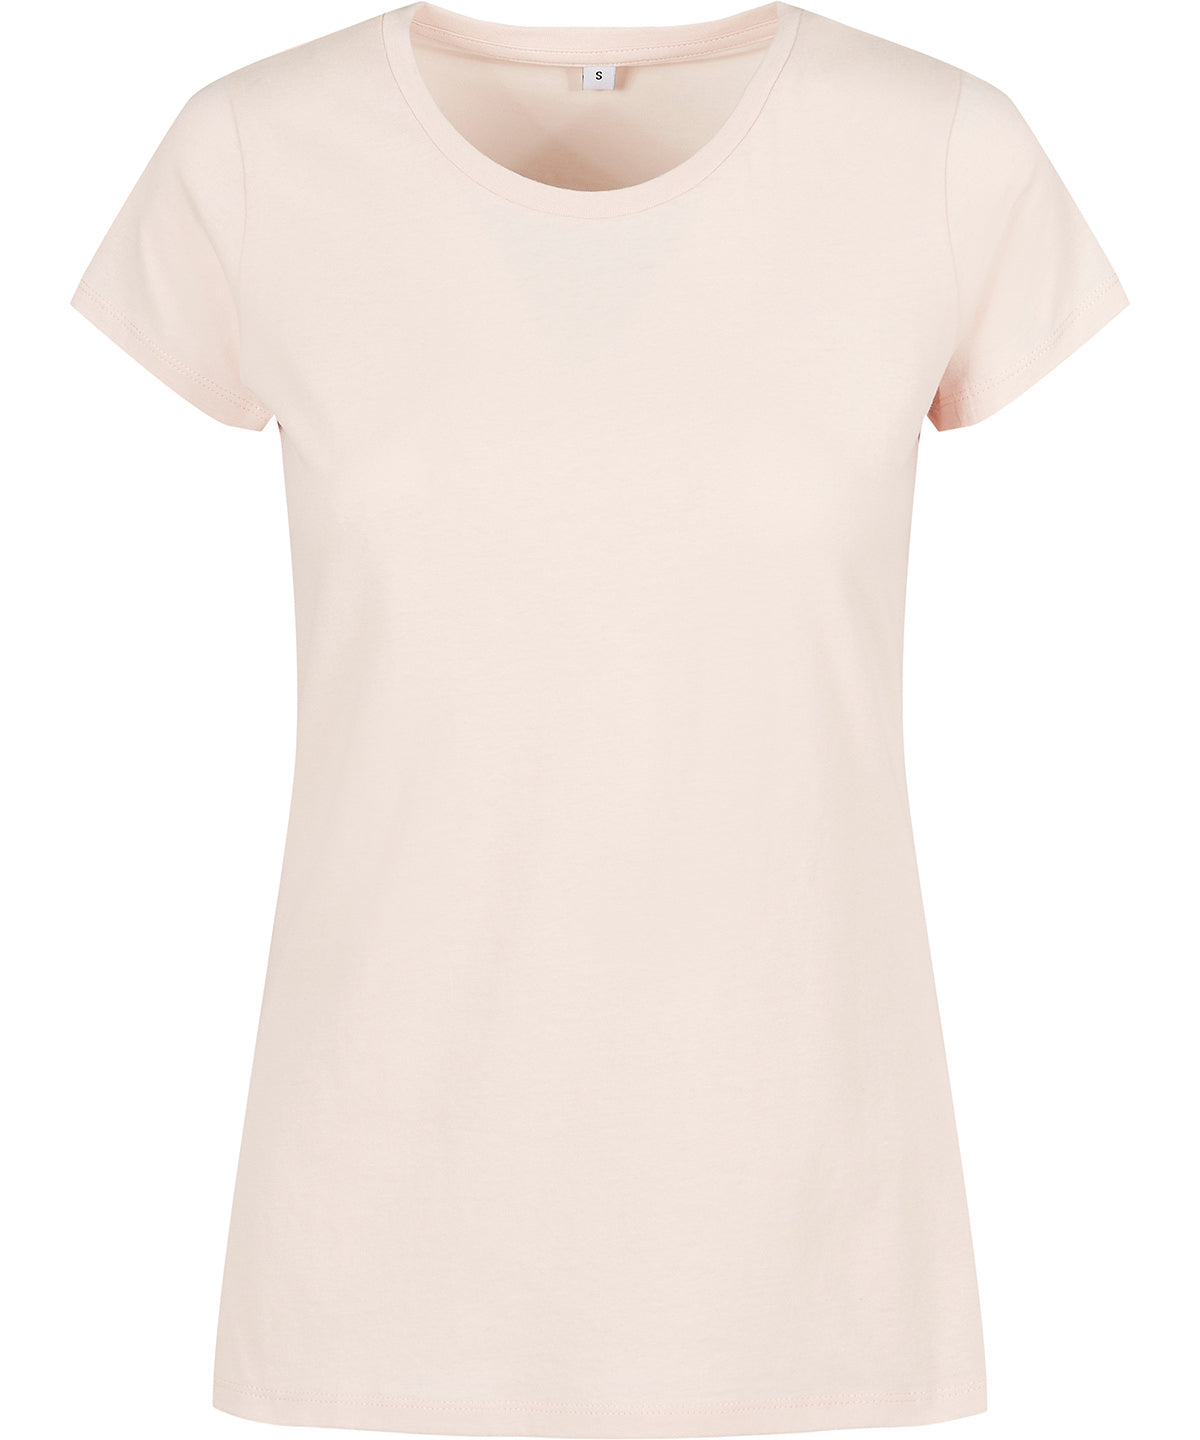 Personalised T-Shirts - Natural Build Your Brand Basic Women's basic tee